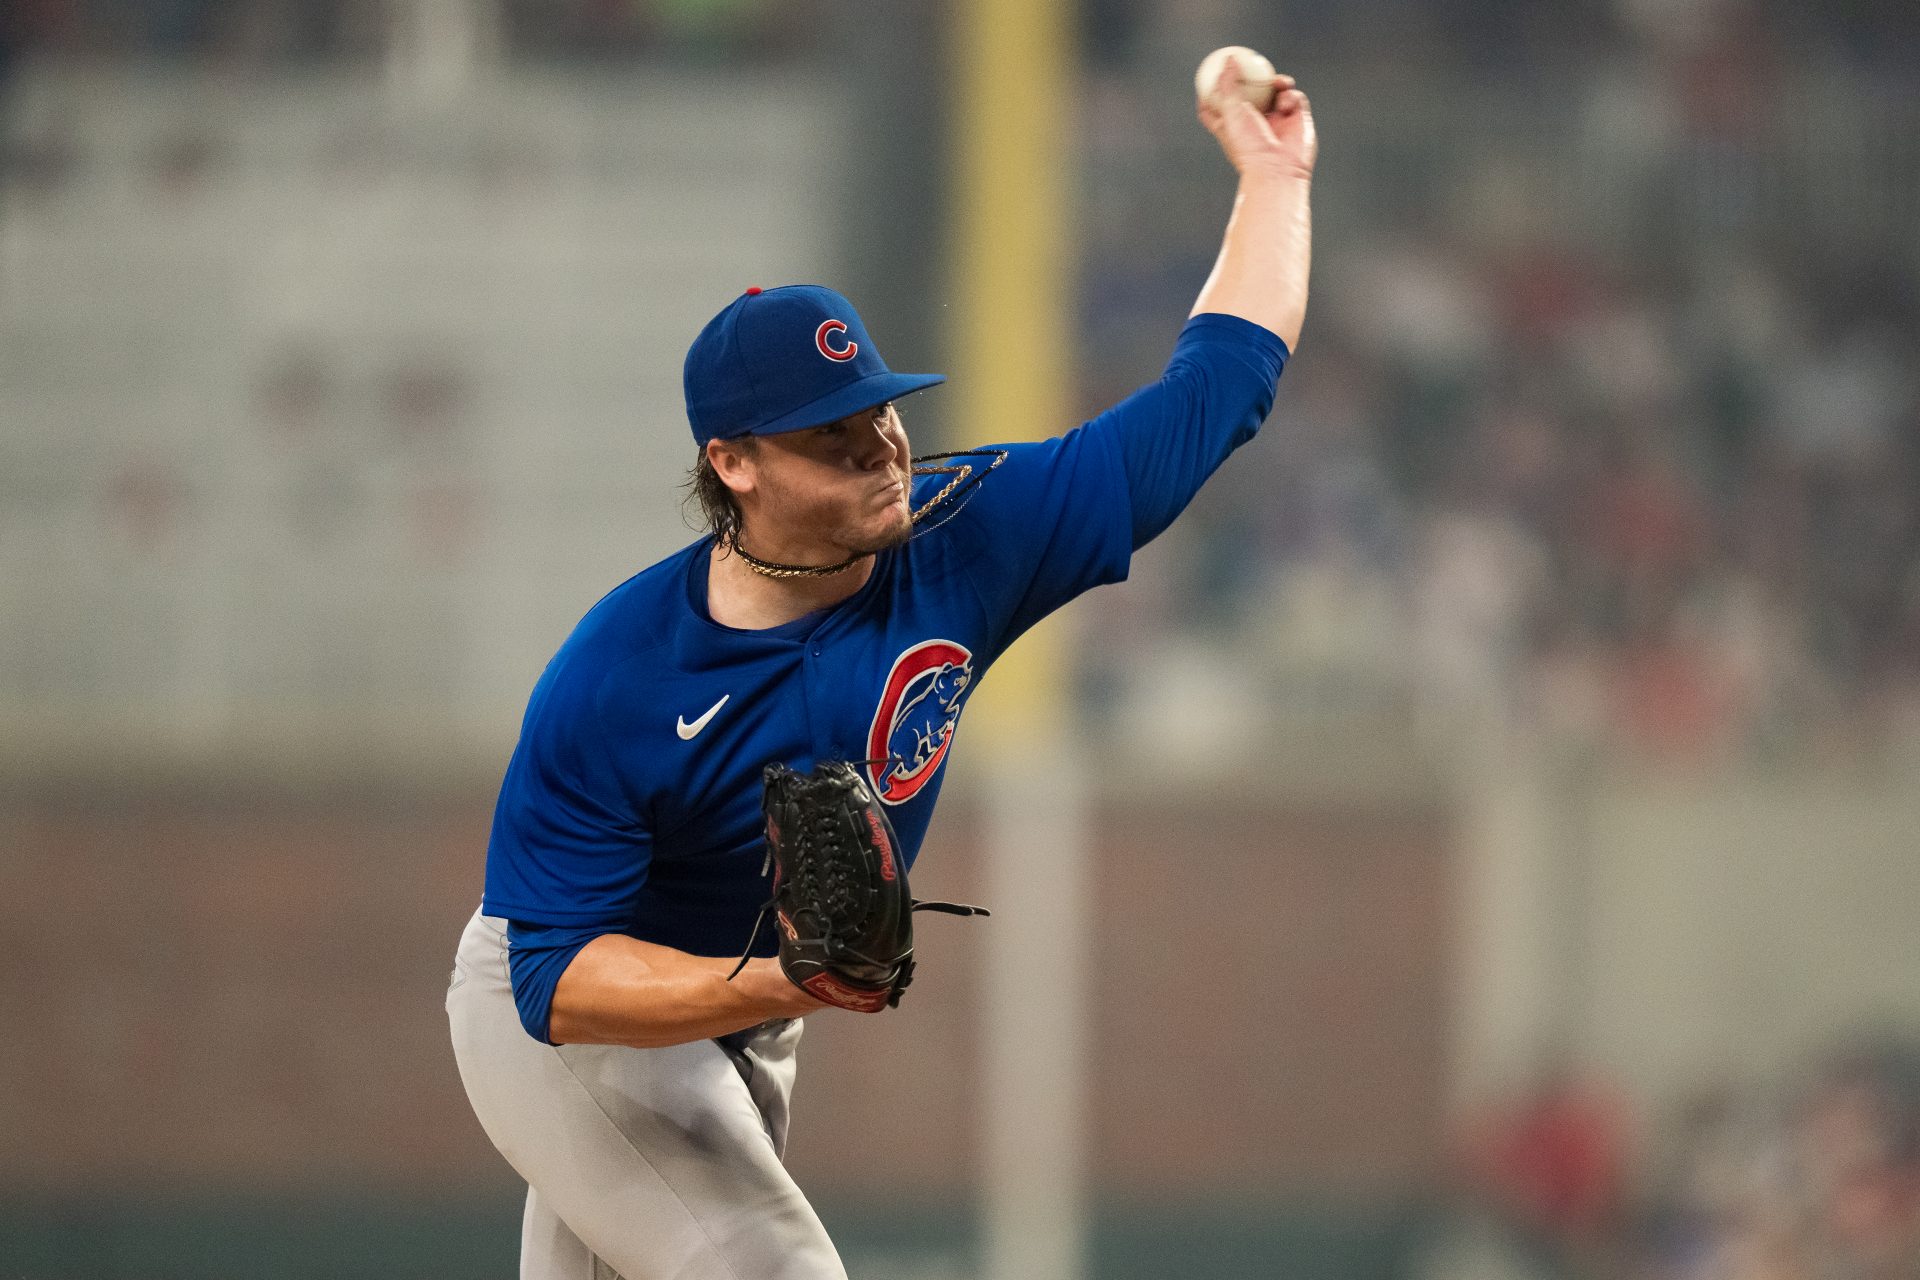 11. Justin Steele, Chicago Cubs